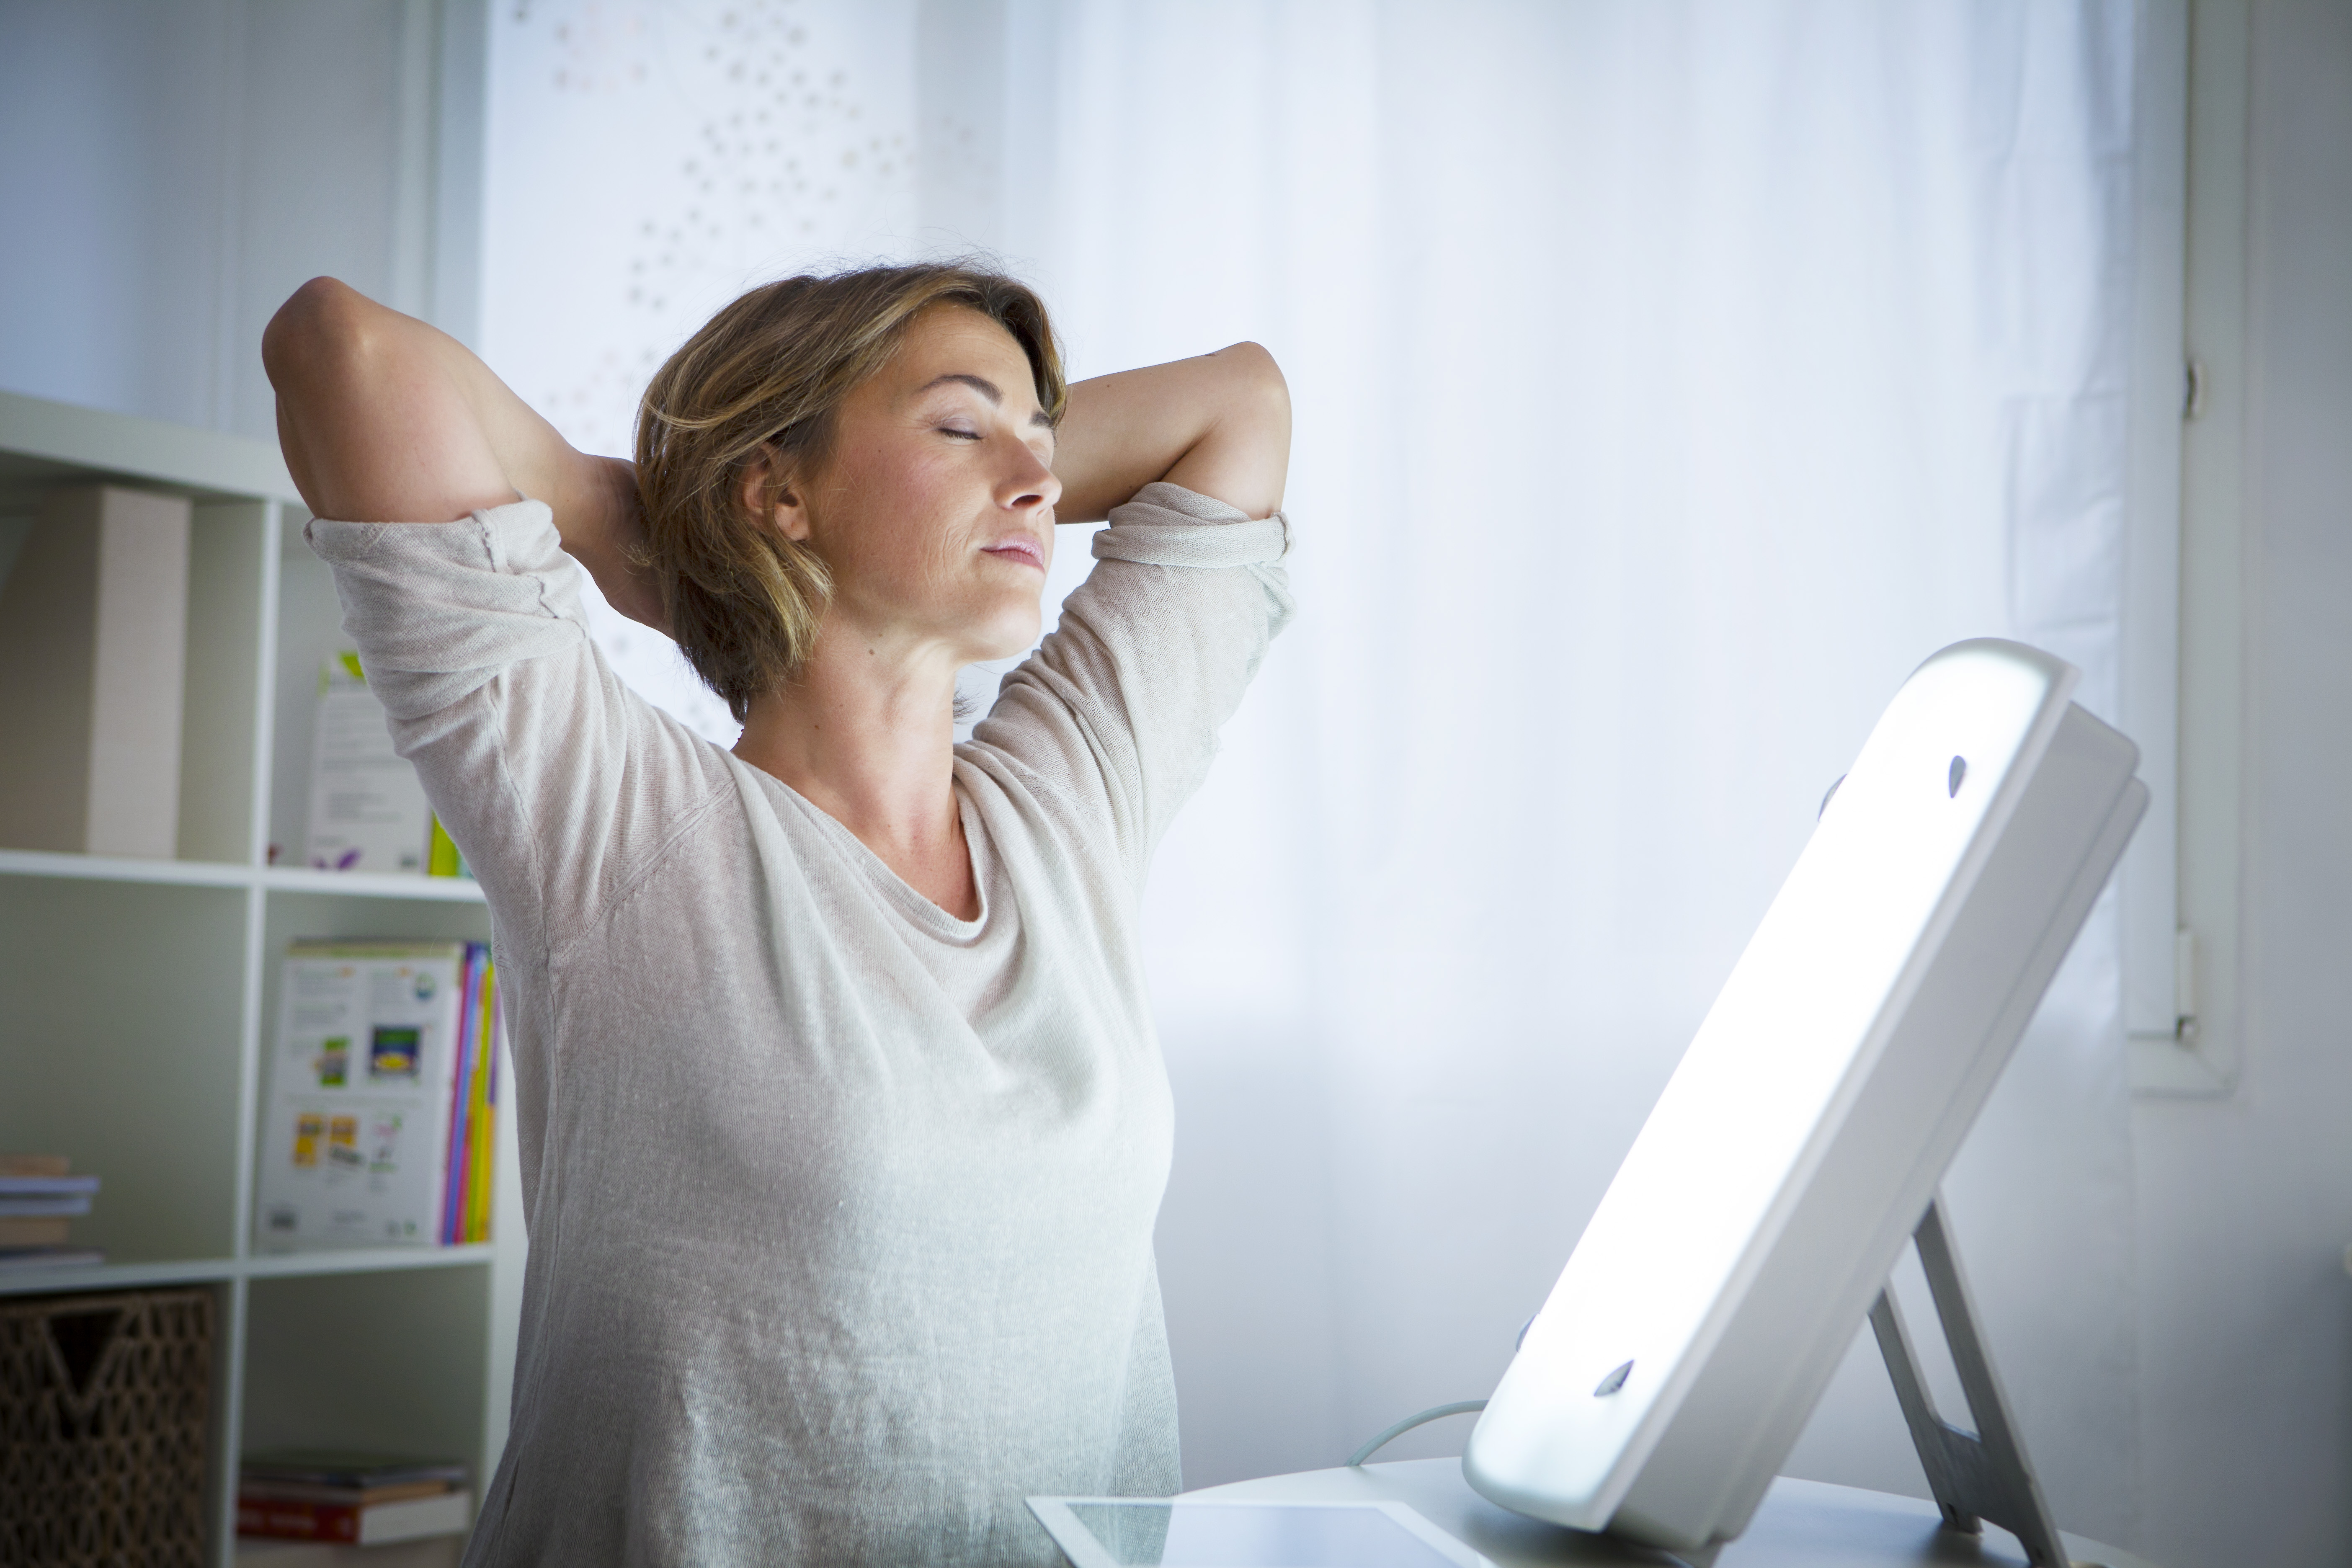 The Light Therapy for Seasonal Disorder